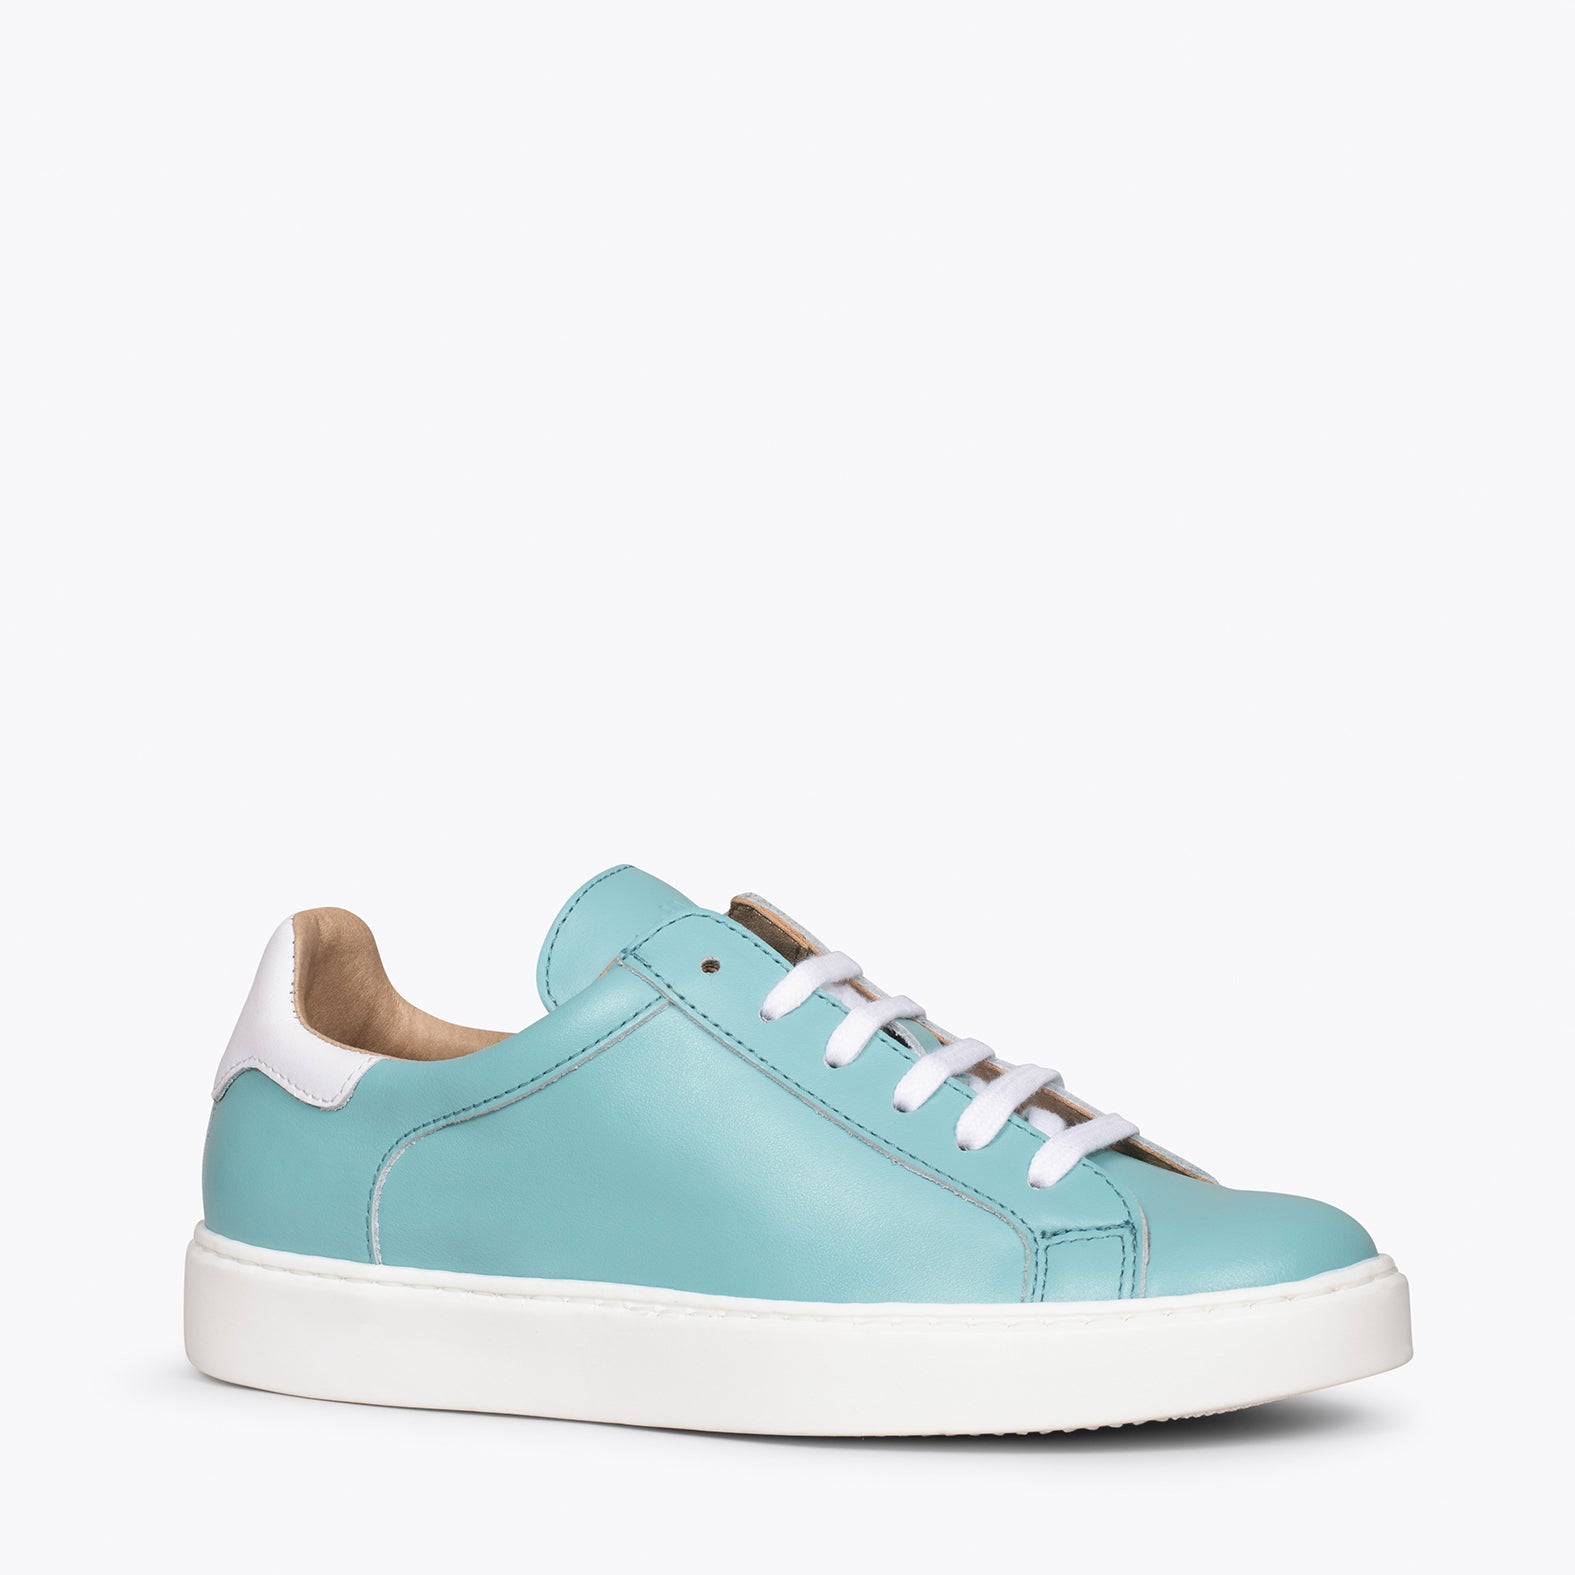 SNEAKER – BLUE sneaker with WHITE detail